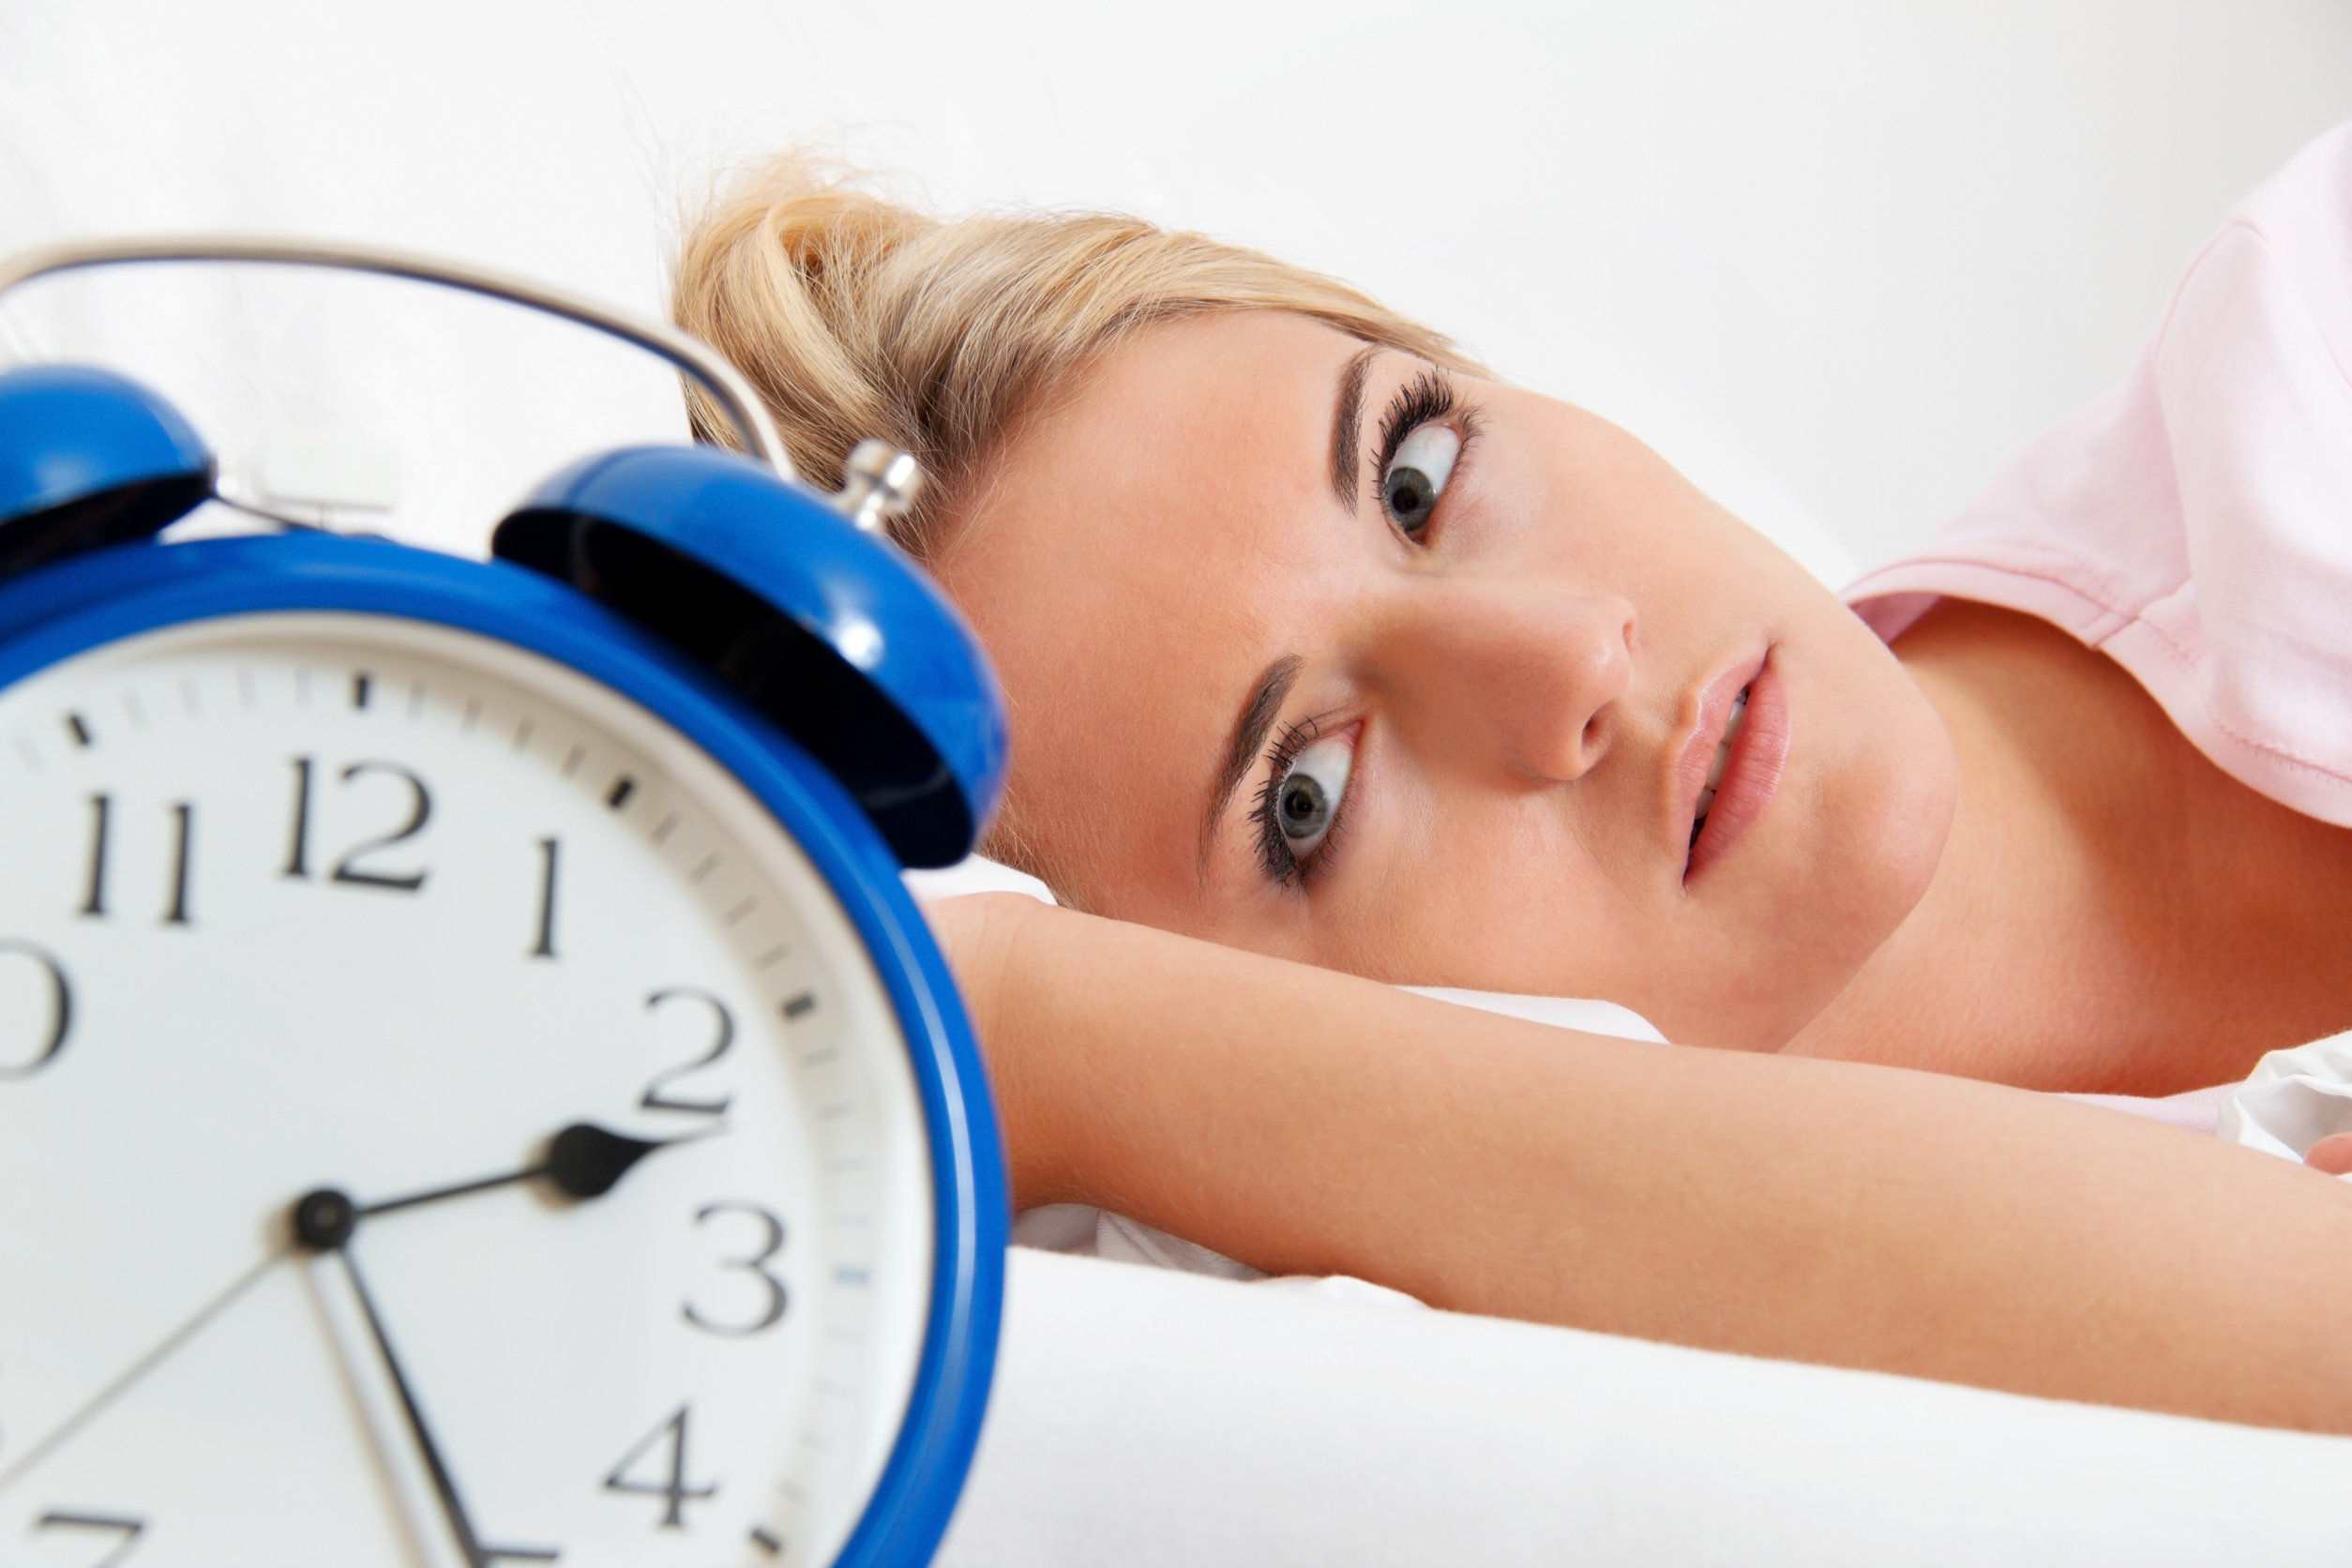 insomnia and menopause